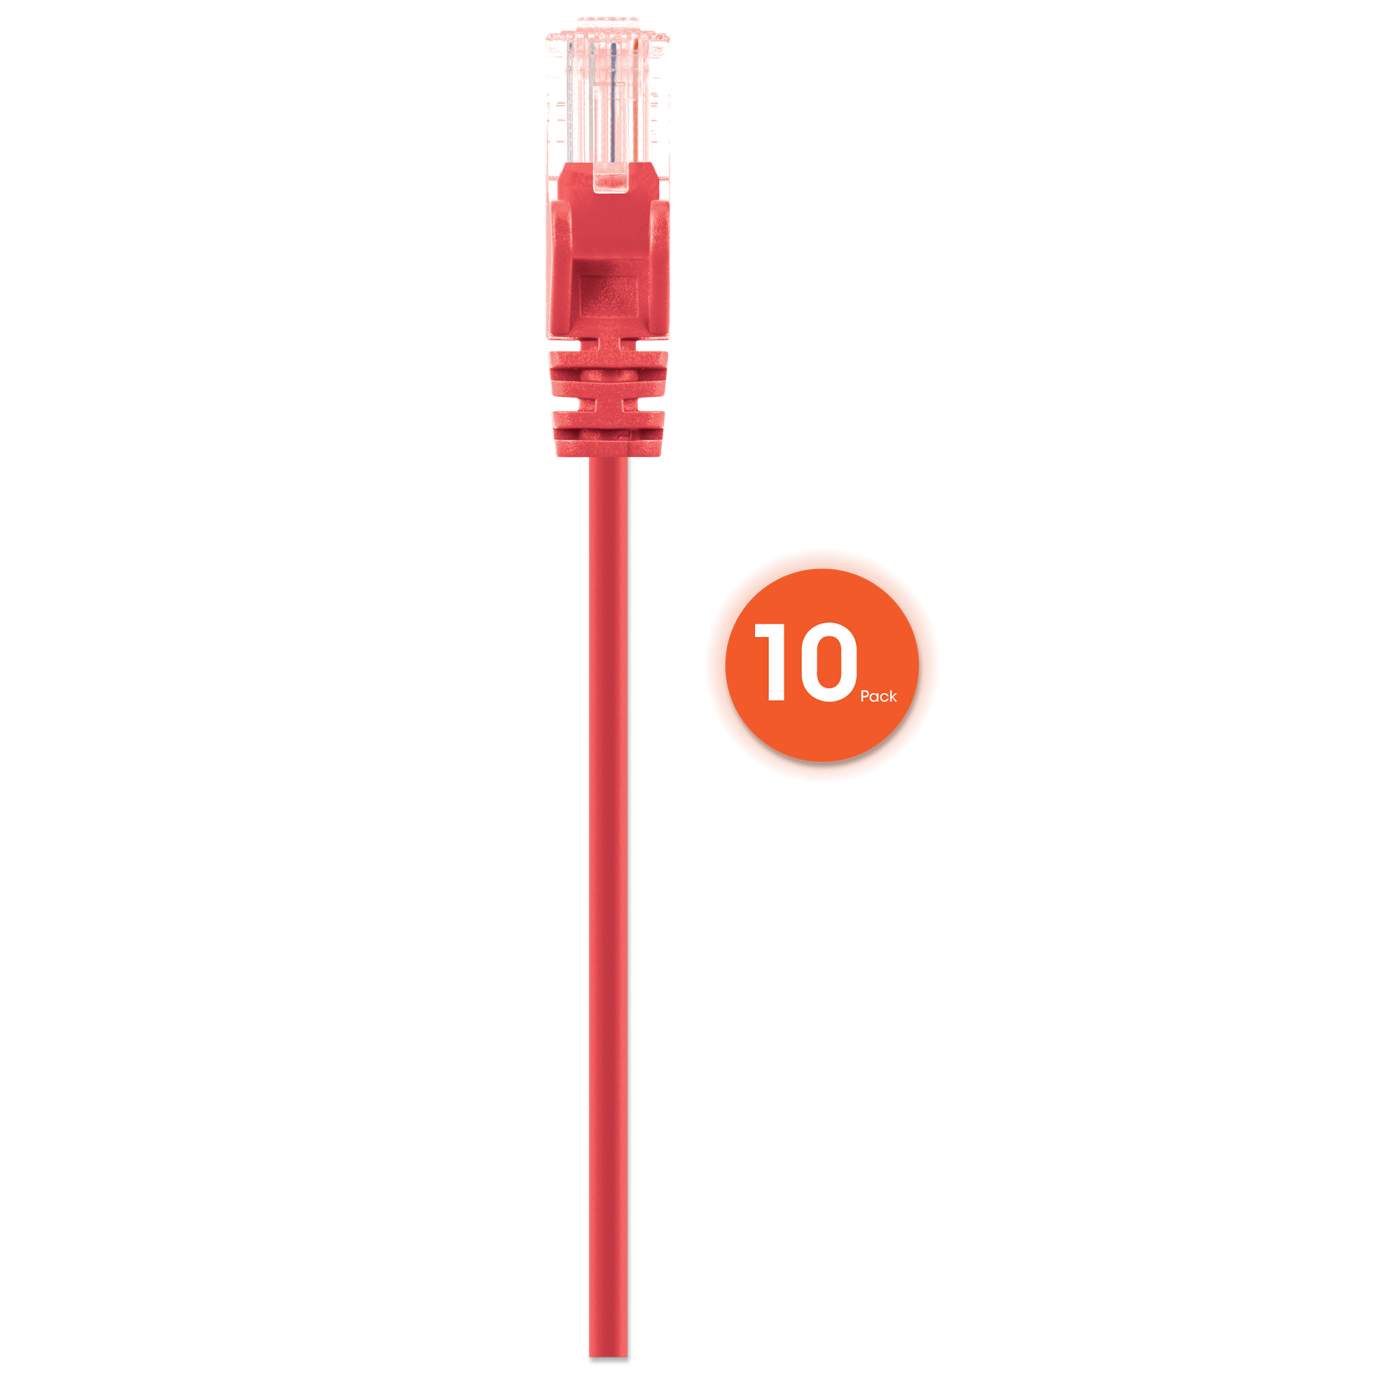 Cat6 U/UTP Slim Network Patch Cable, 7 ft., Red, 10-Pack Image 4